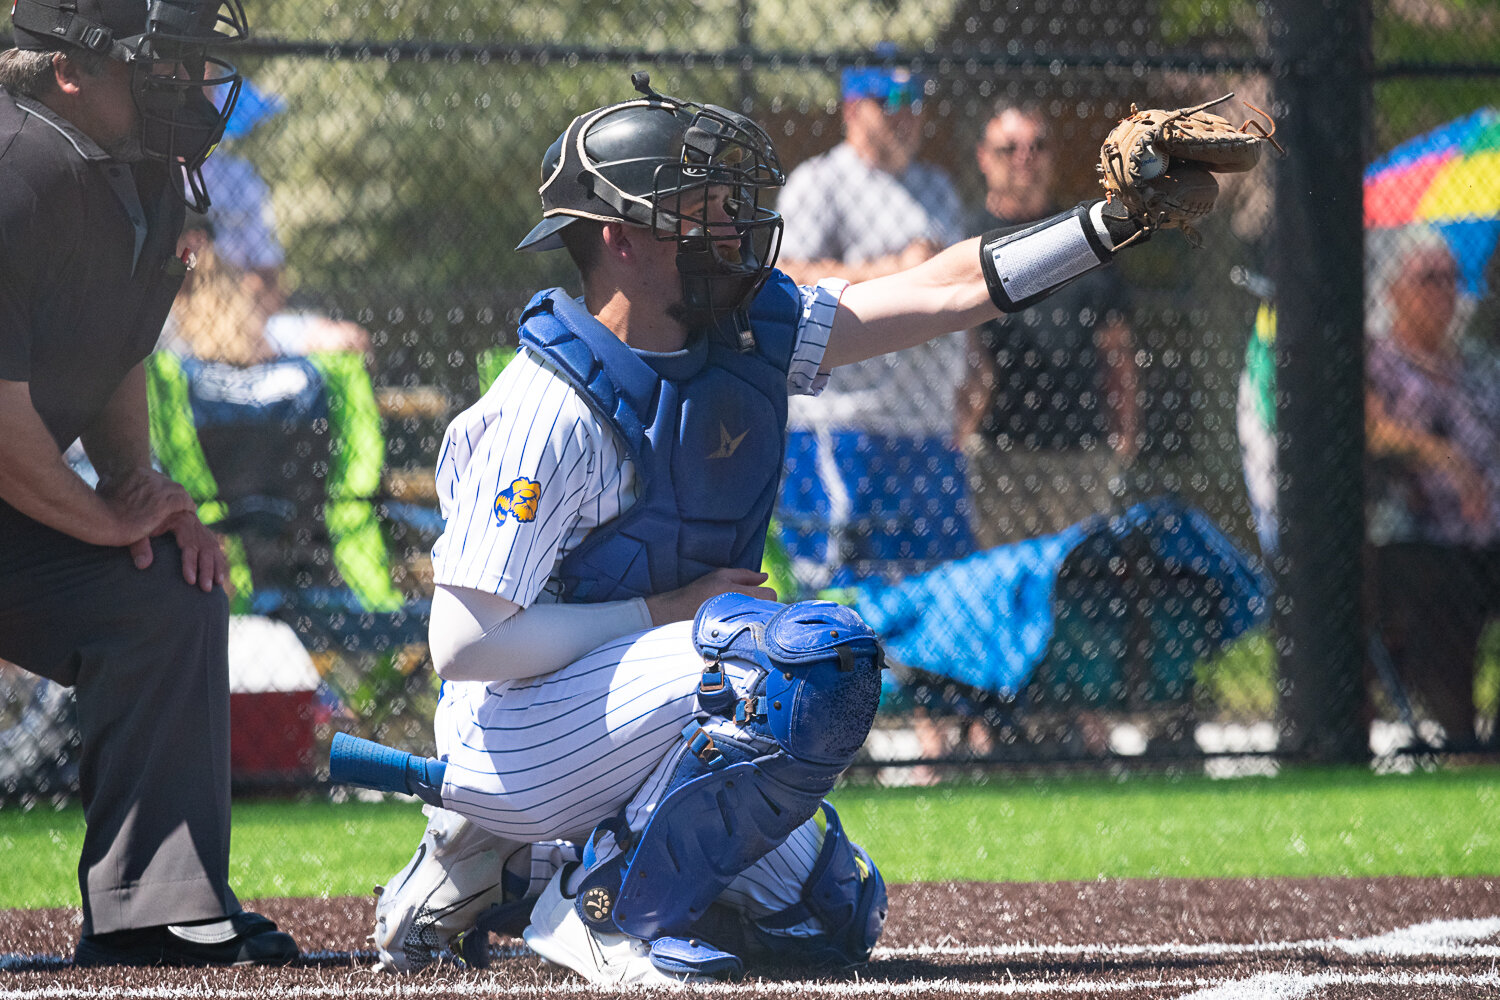 Braize Mitchell catches a pitch during Centralia College's 8-3 loss to Lower Columbia on May 12.